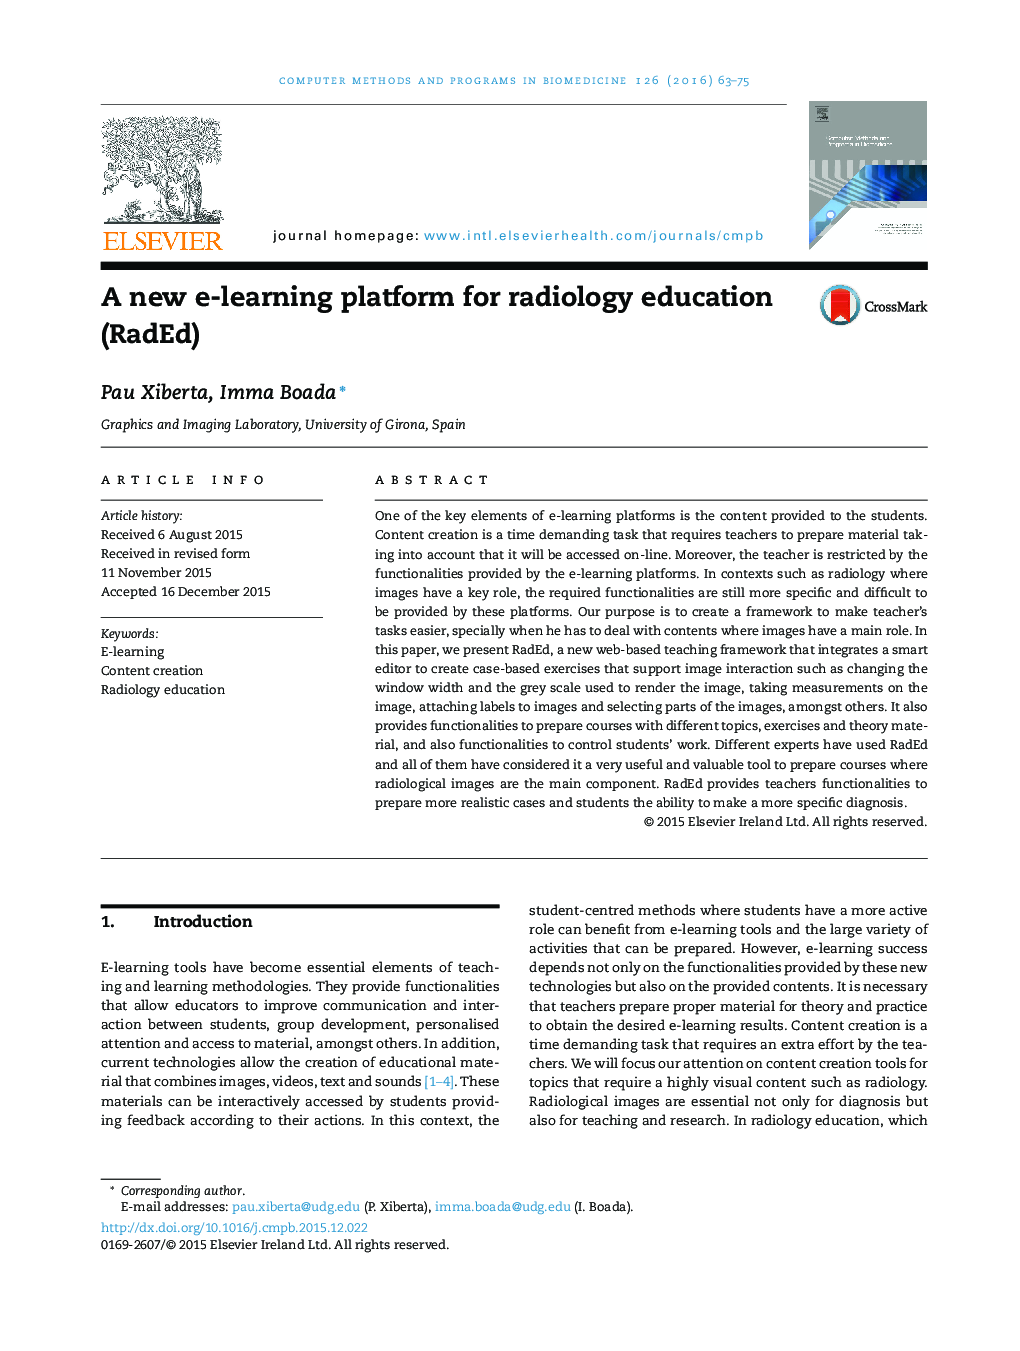 A new e-learning platform for radiology education (RadEd)